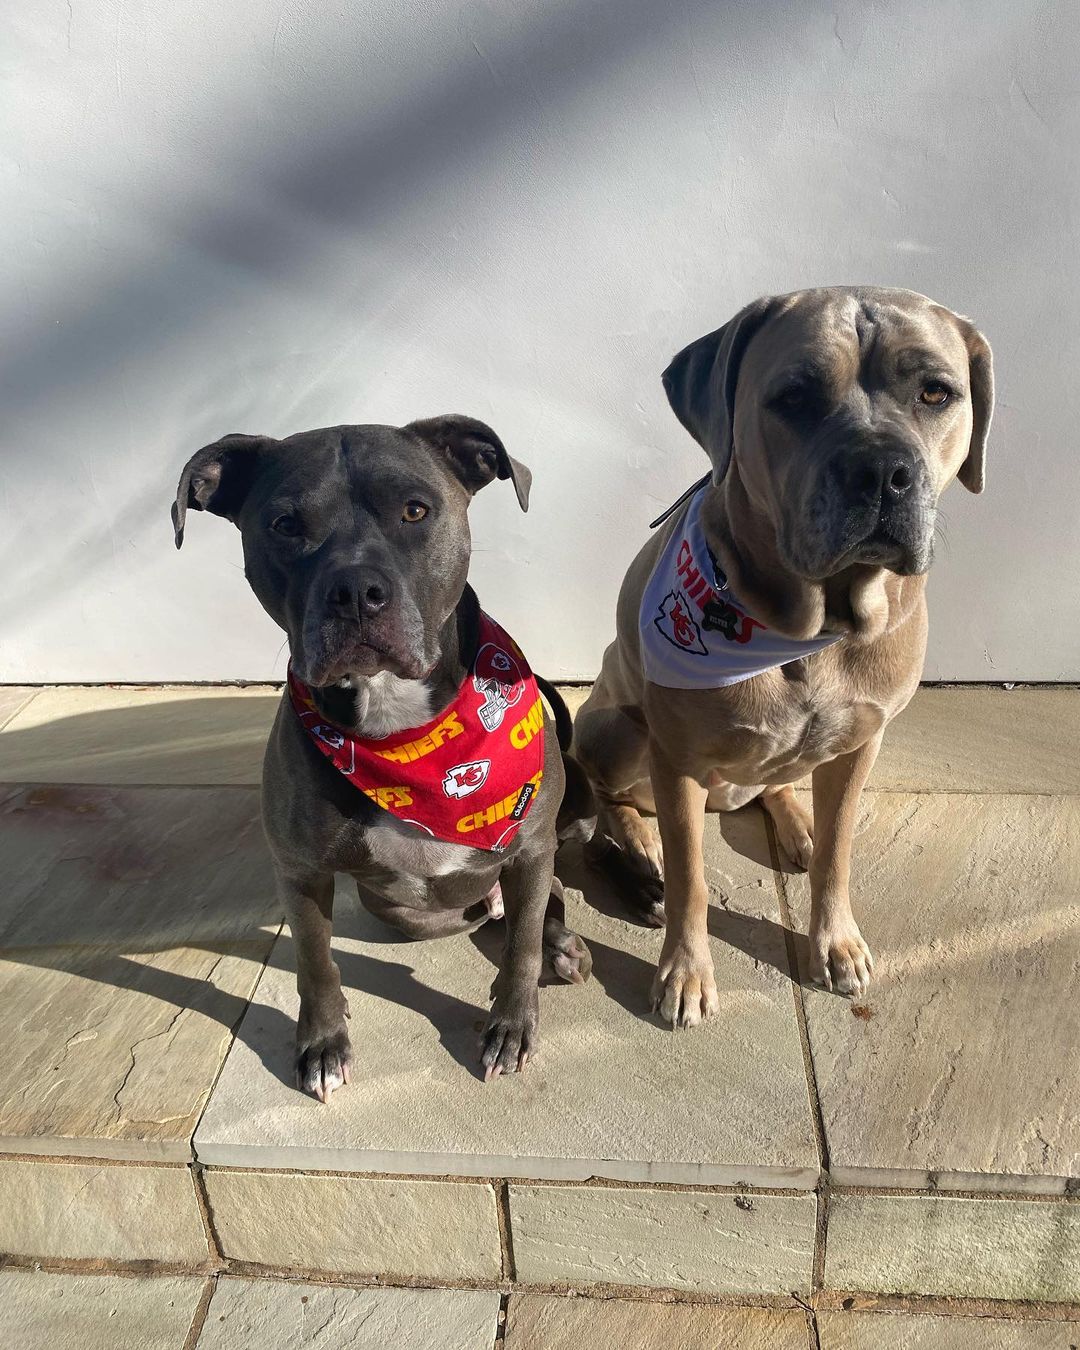 Patrick Mahomes dogs - Steel the pitbull and Silver the Cane Corso